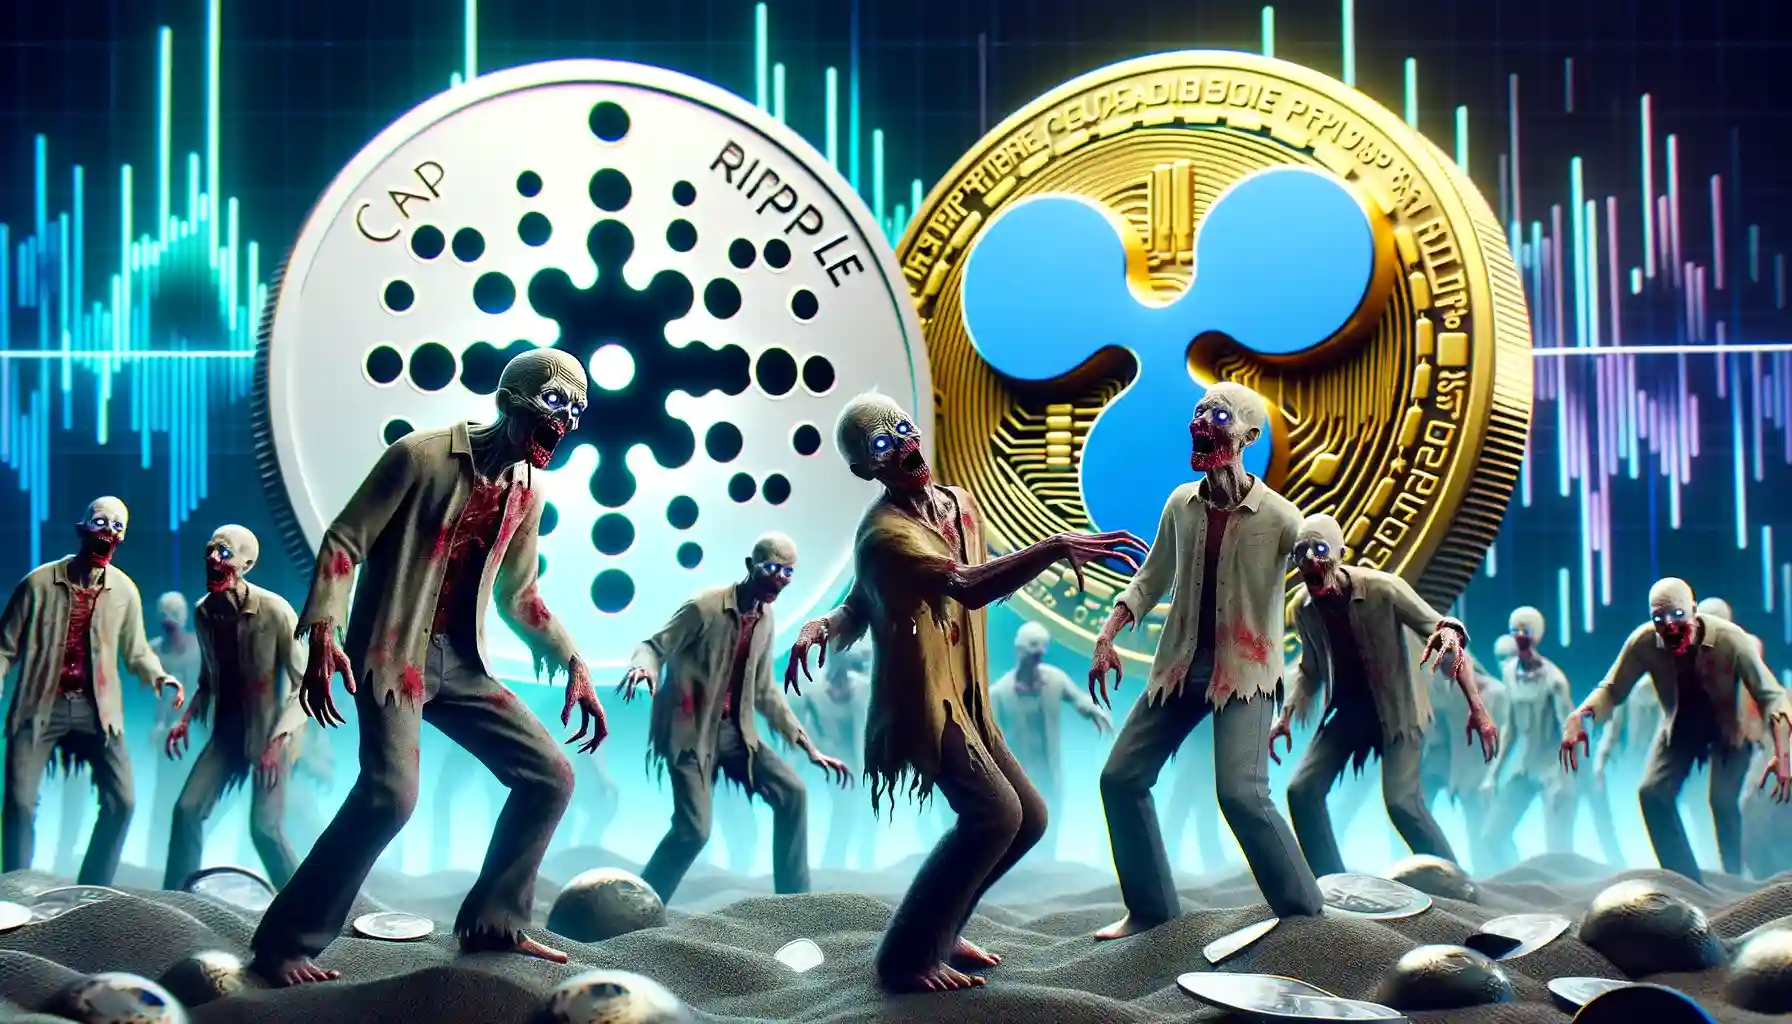 Cardano’s Hoskinson claps back after ADA, XRP branded as ‘crypto zombies’